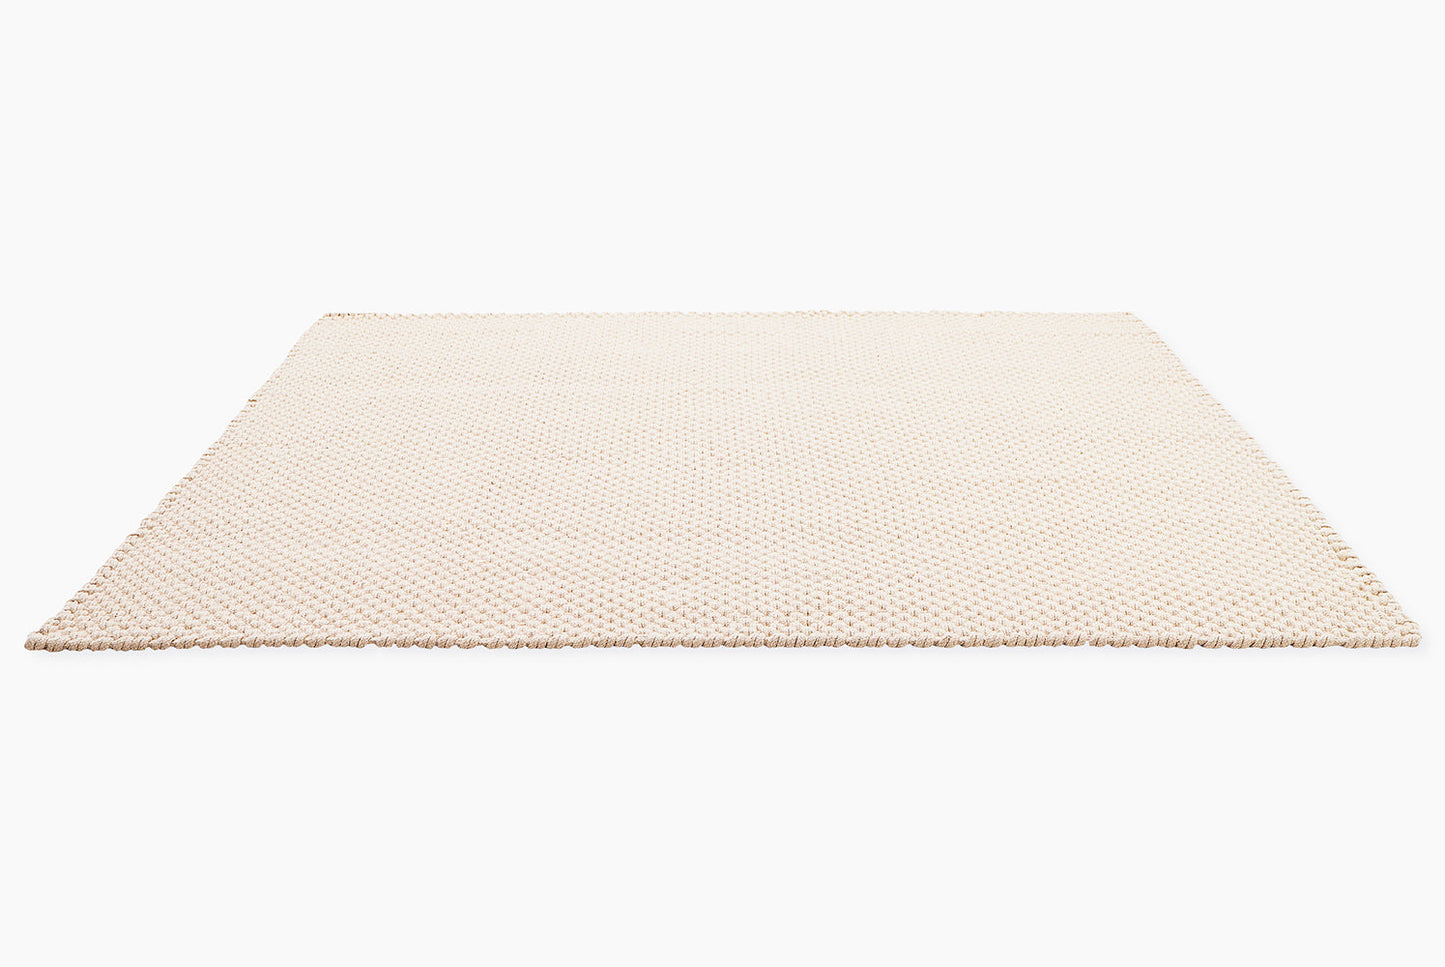 Brink and Campman 497009 Lace In Beige Rug